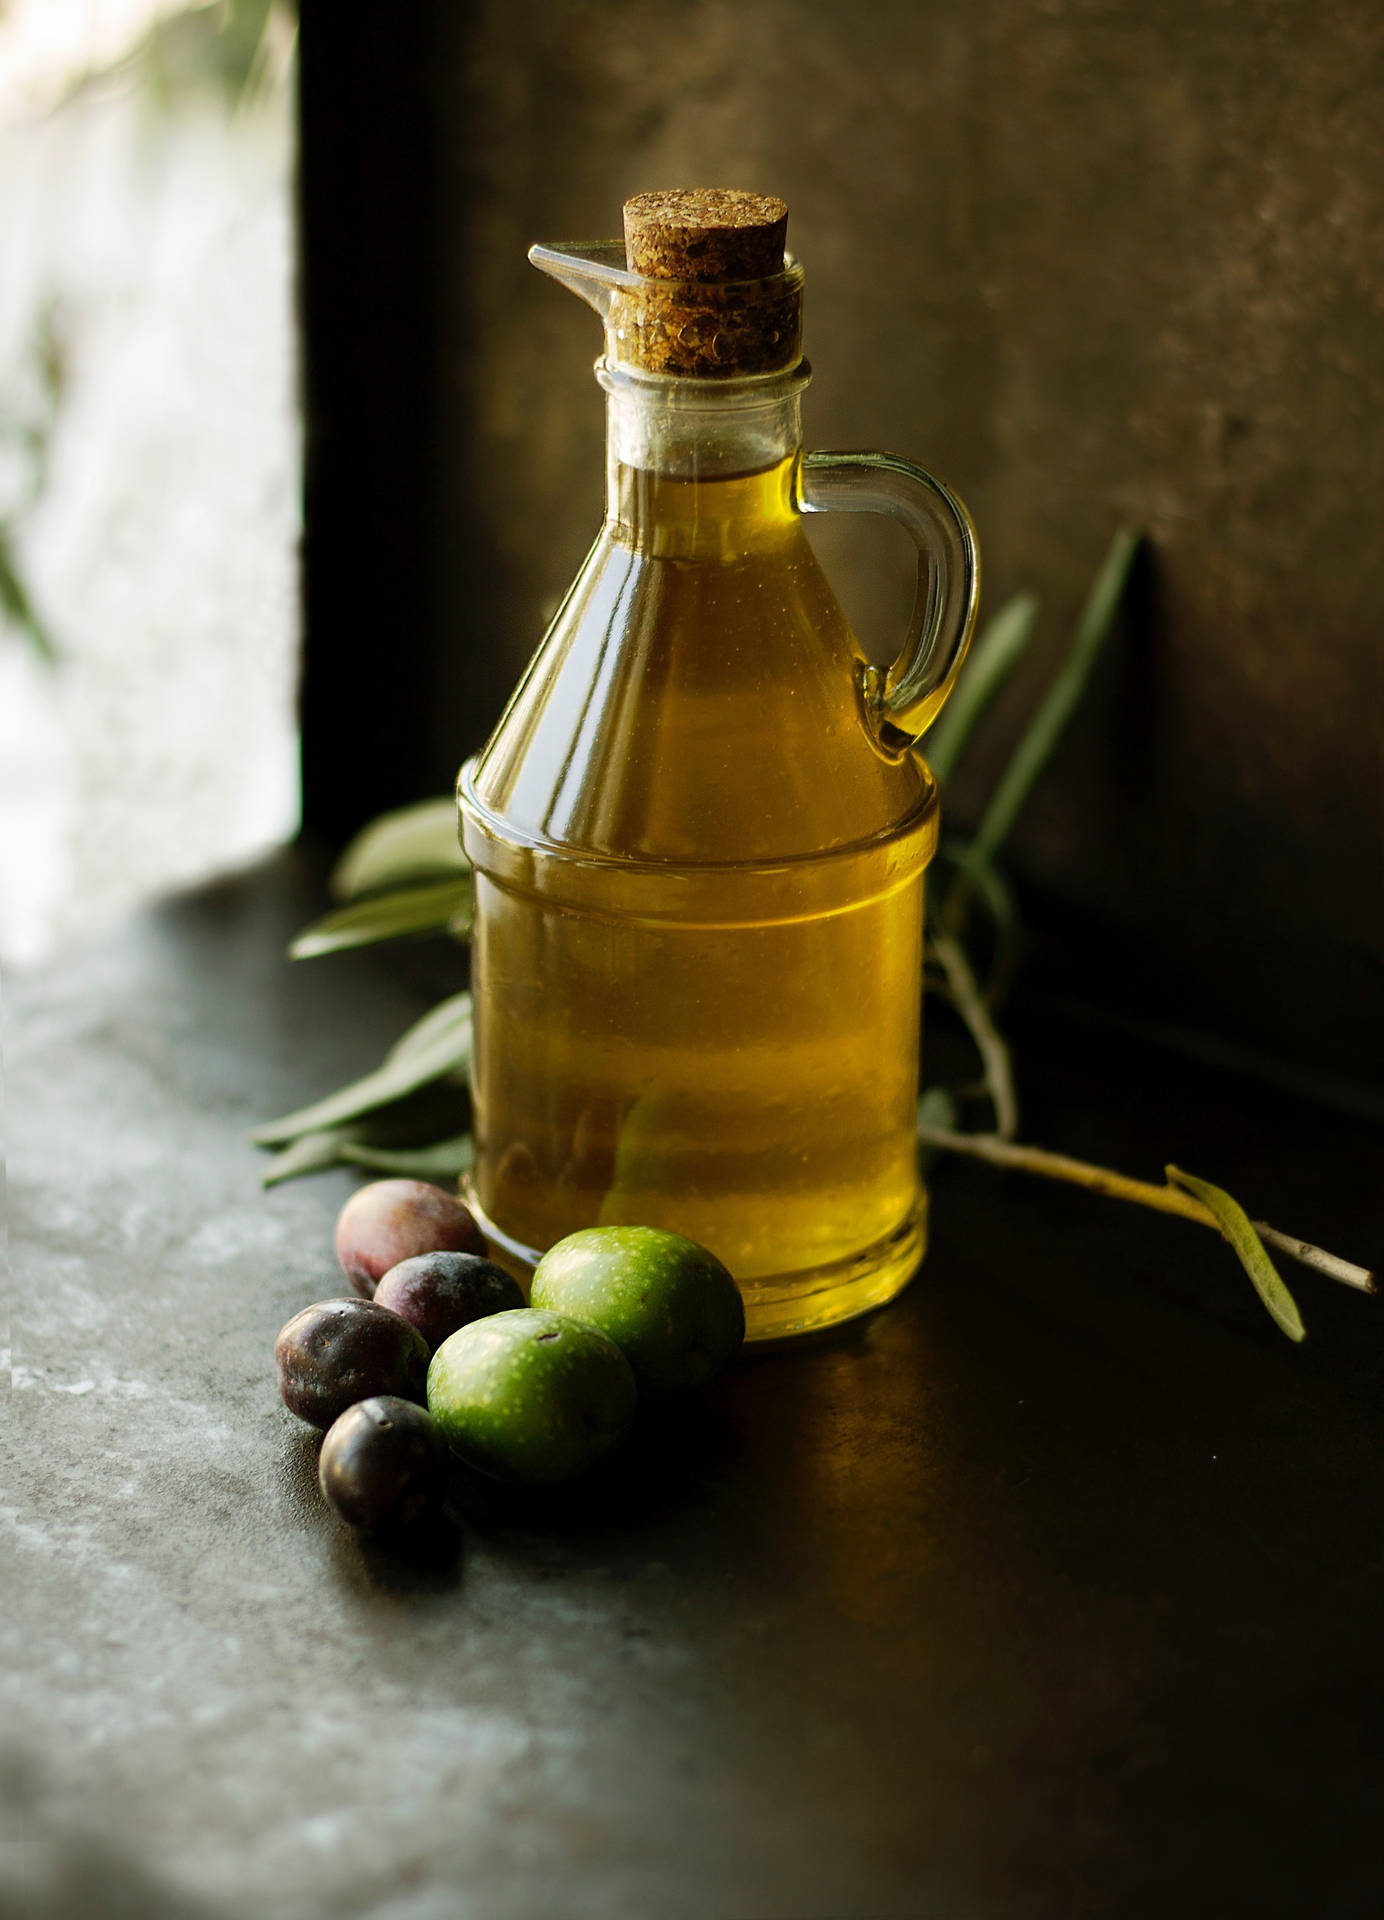 "High-Quality Italian Olive Oil with Fresh Olives" Wallpaper